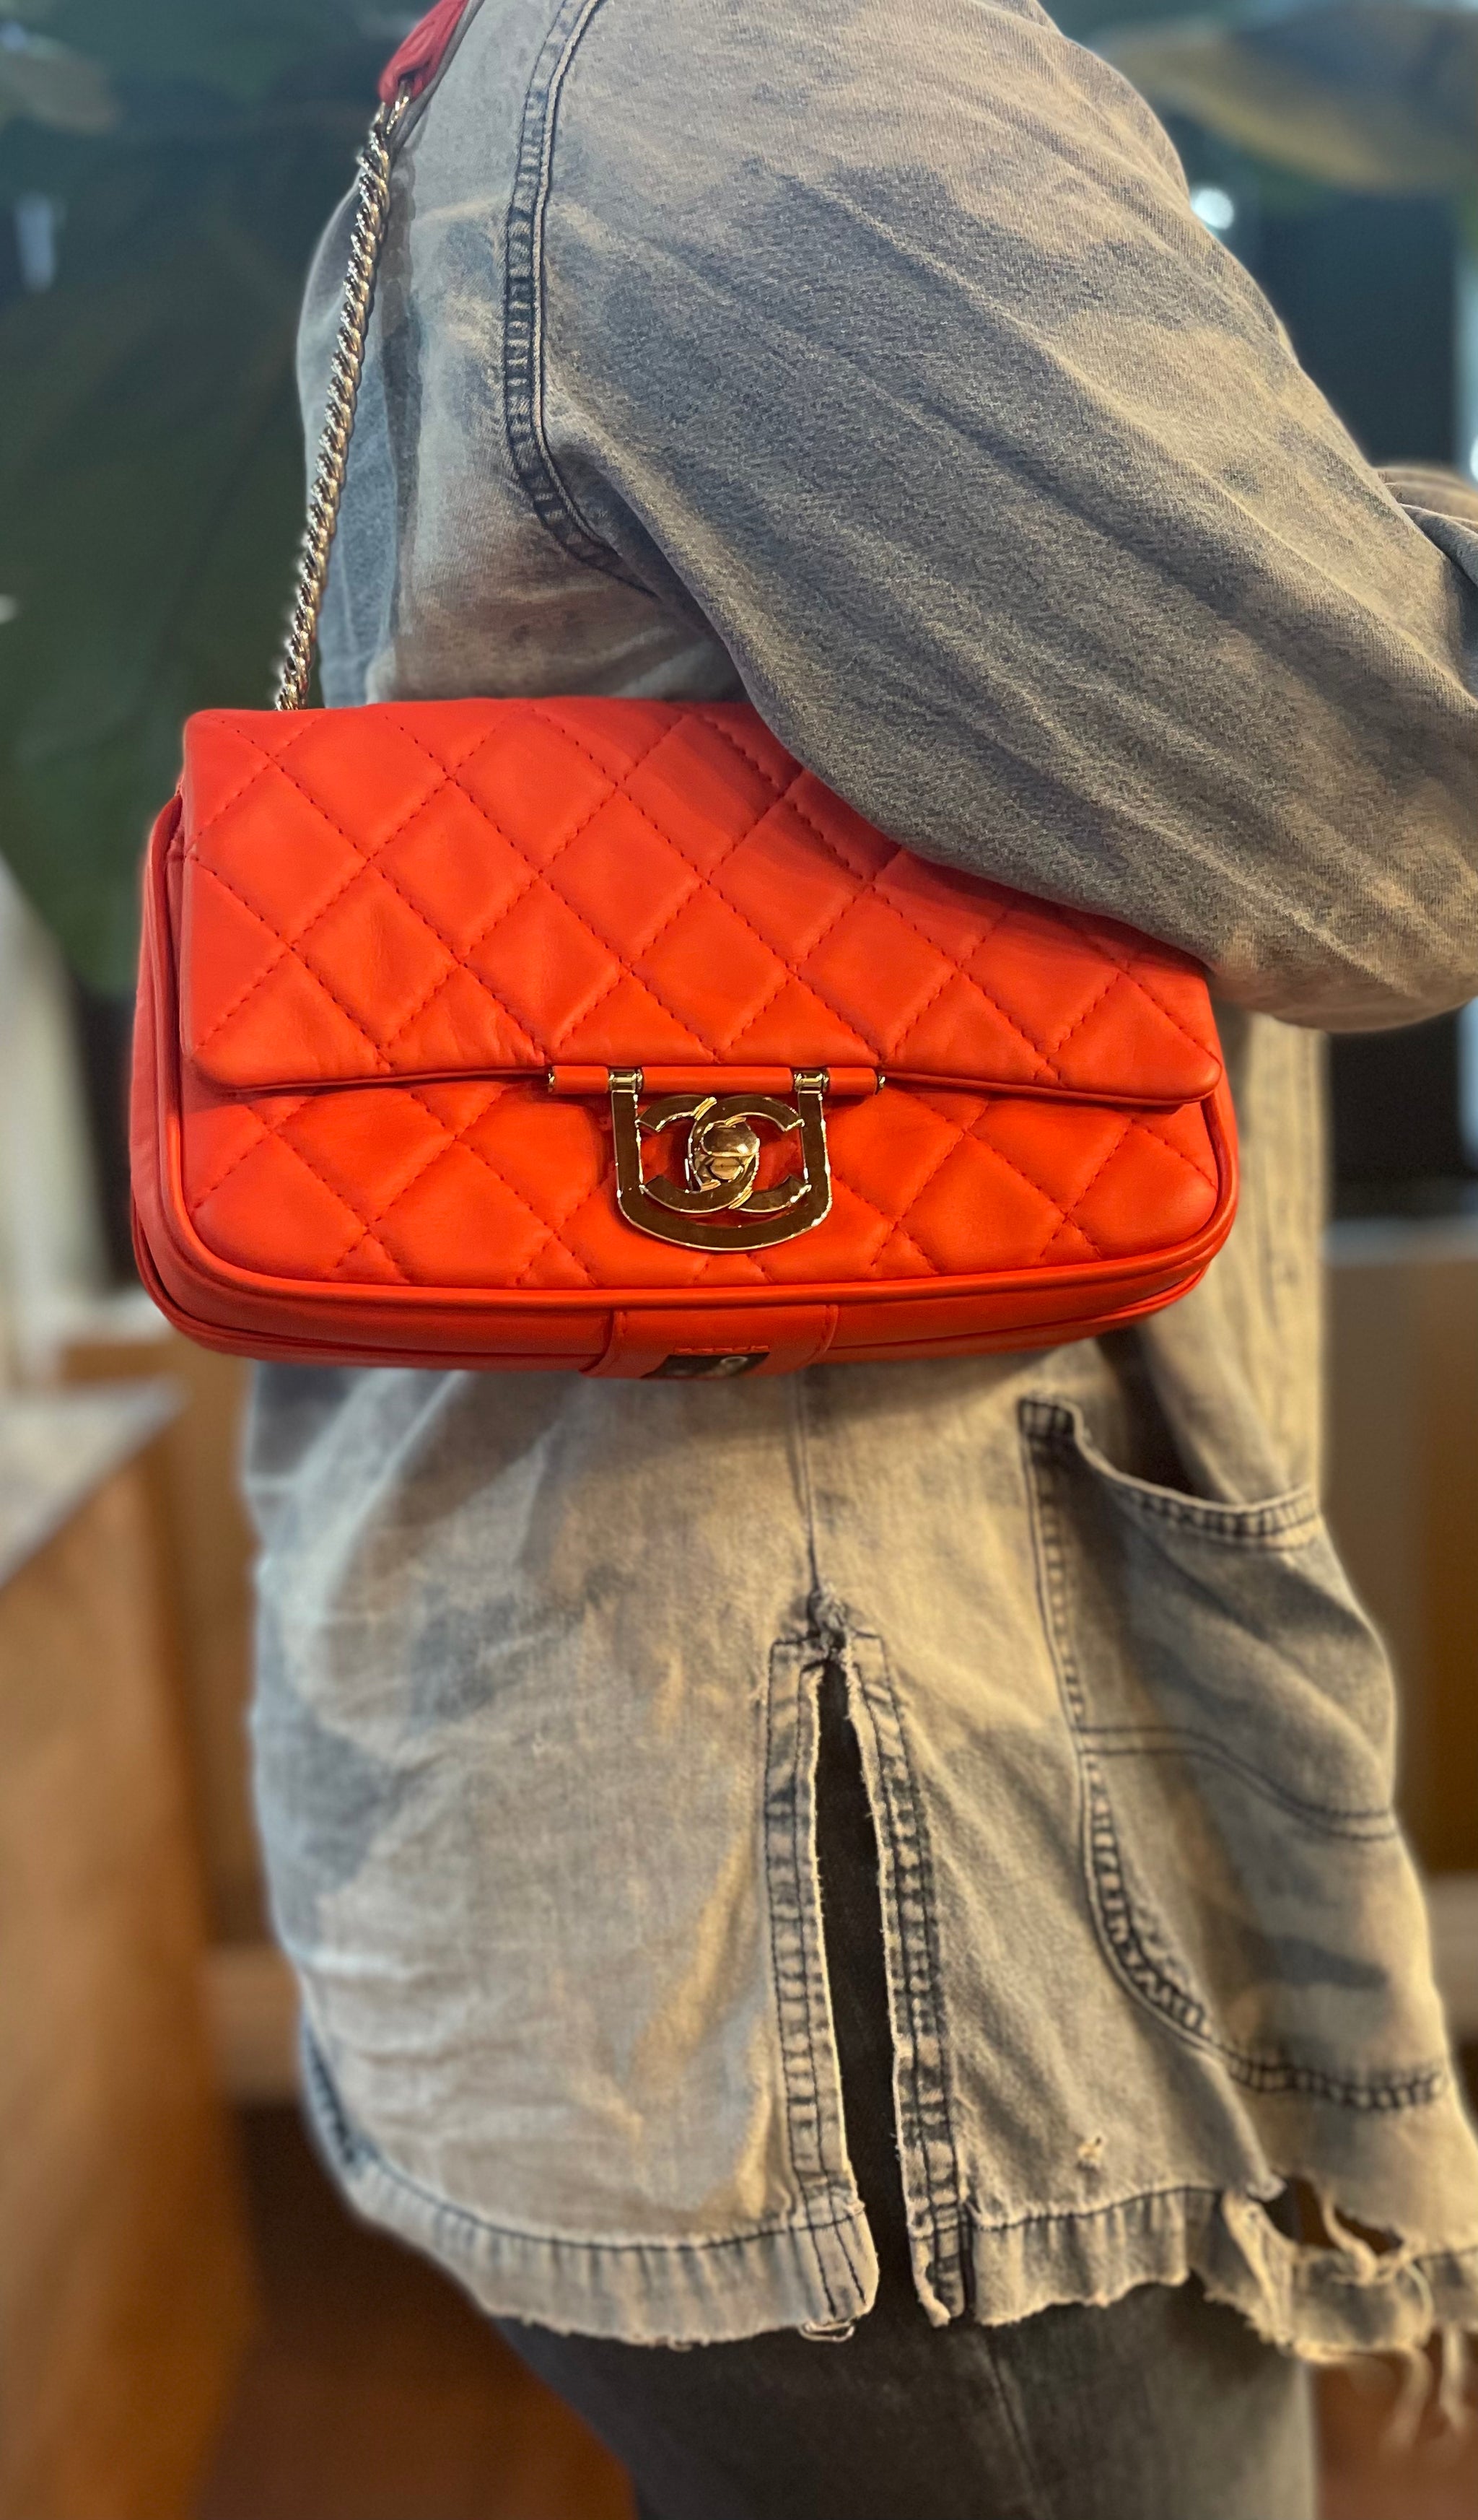 CHANEL Red Lambskin Quilted Icons Secret Label Flap Bag - The Purse Ladies